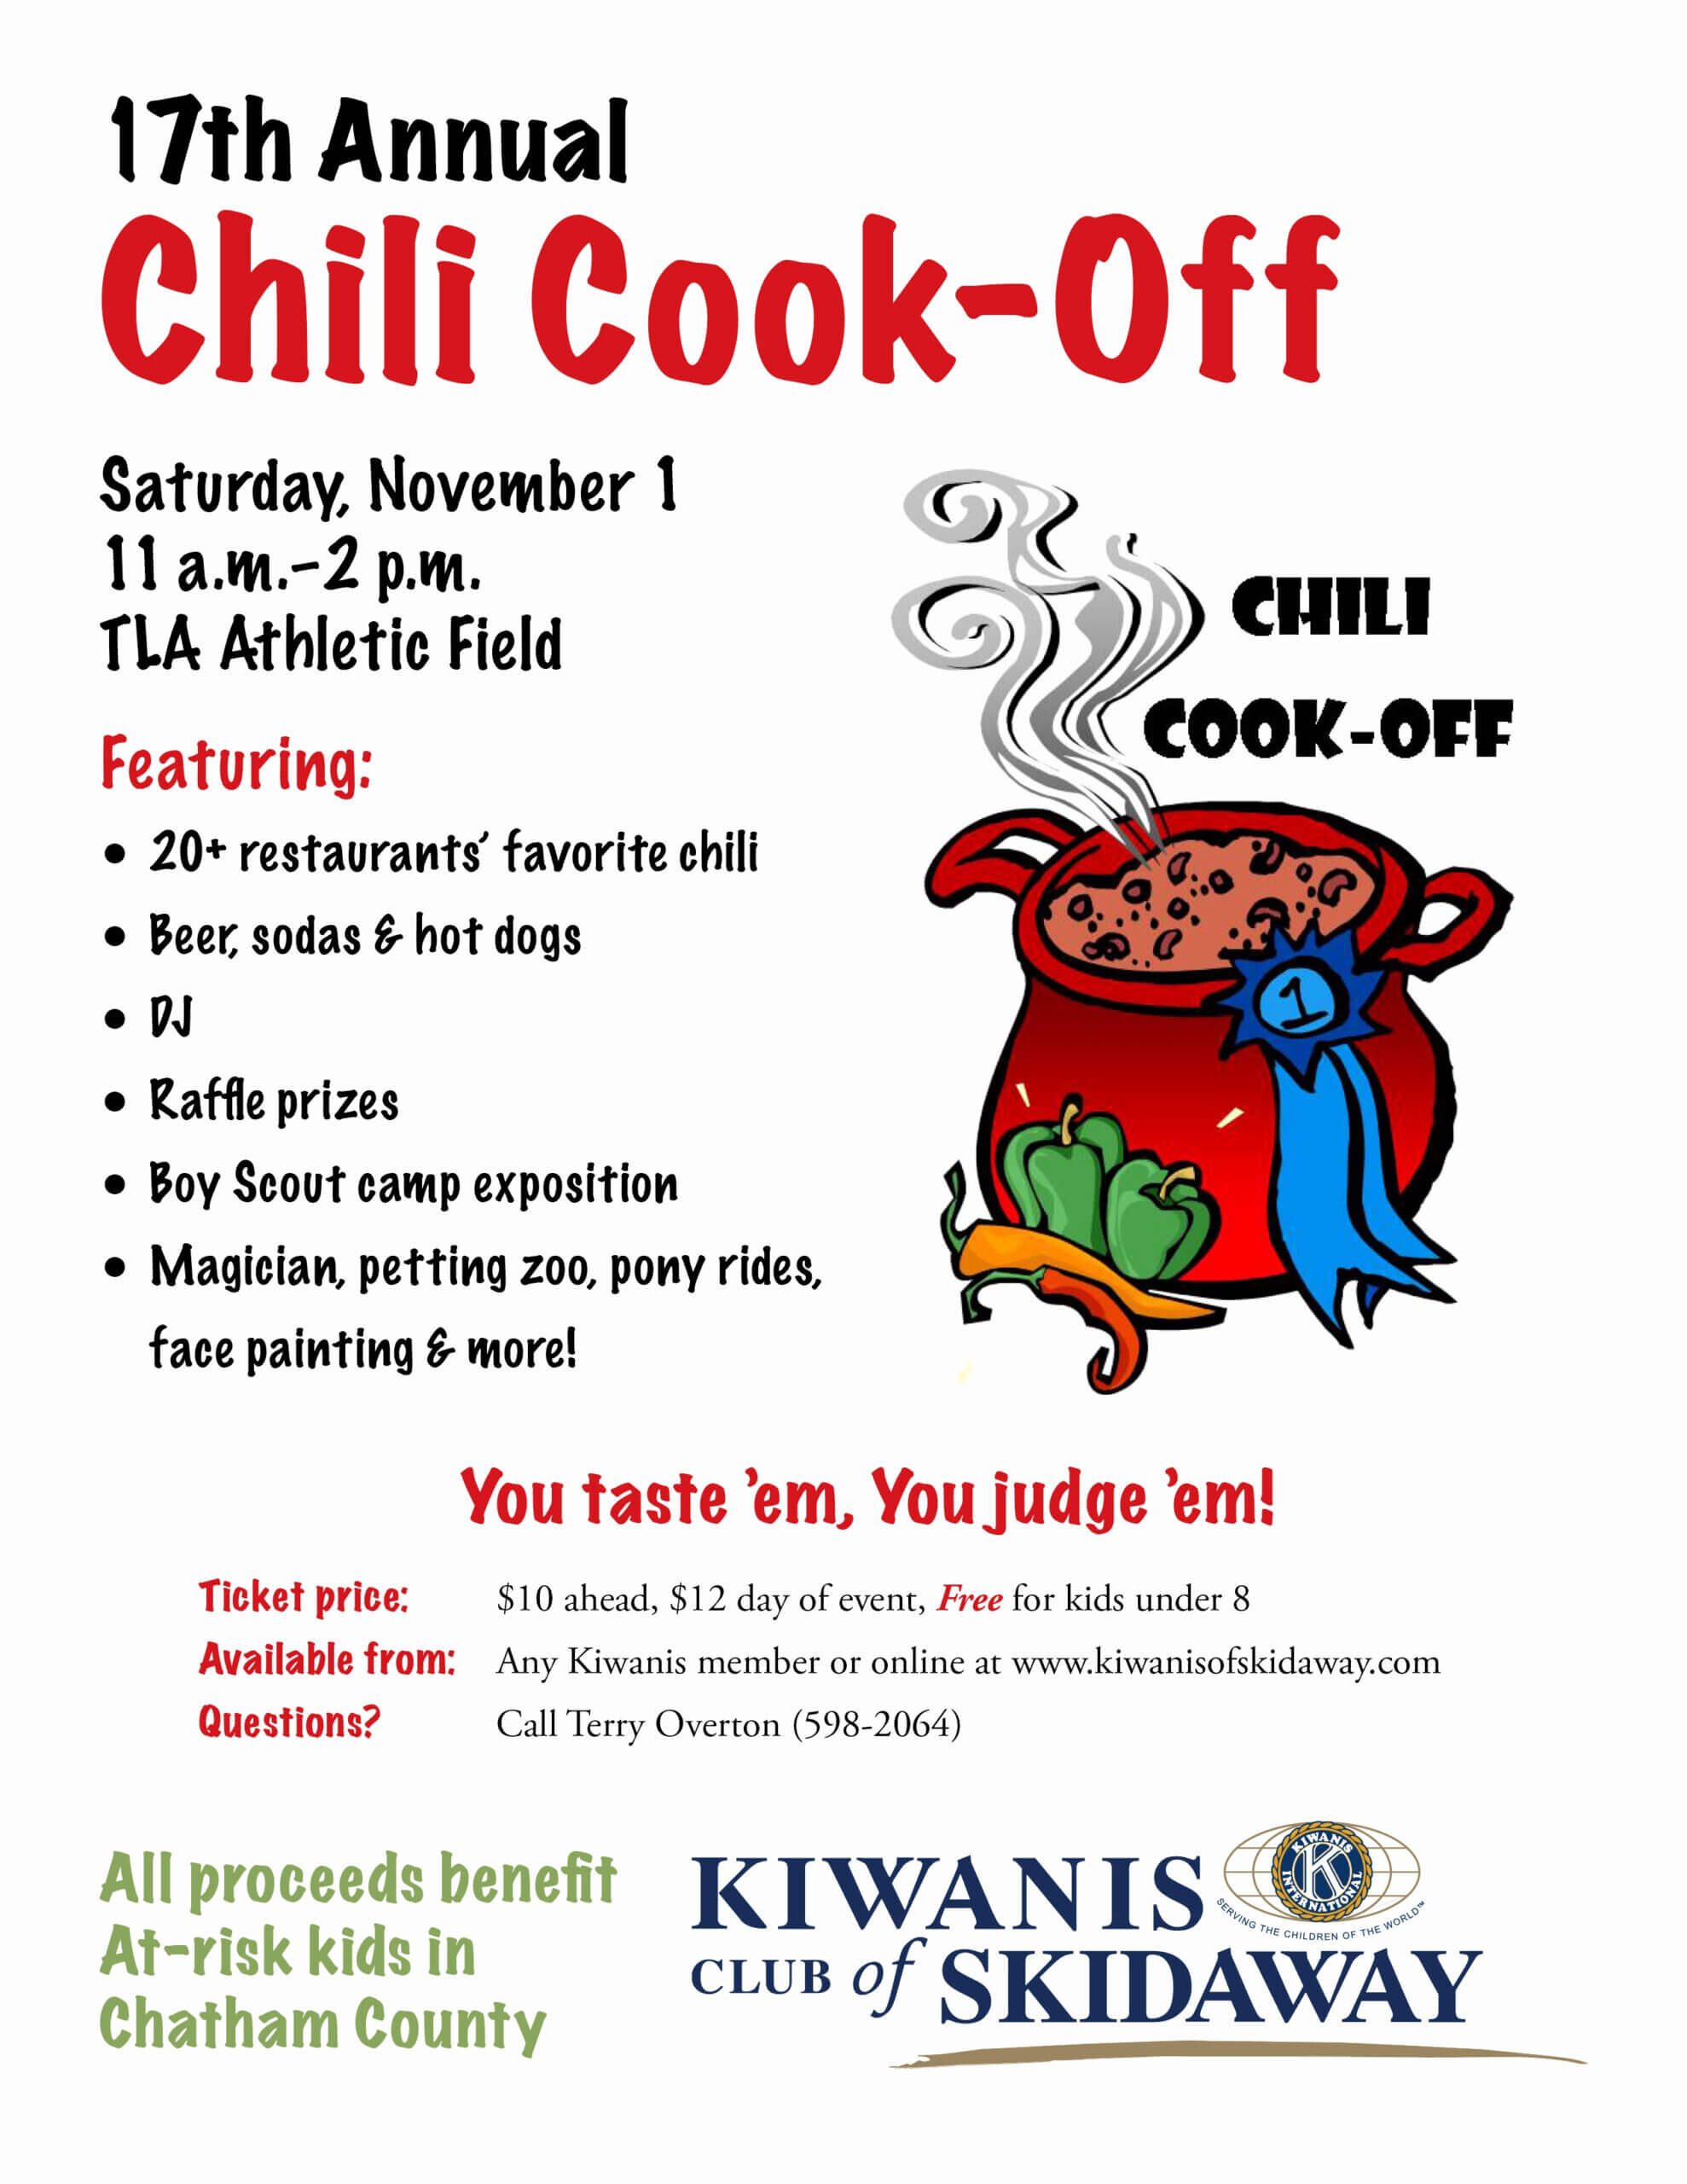 005 Bigpreview Chili Cook Off Flyer Psd Template Facebook Throughout Chili Cook Off Flyer Template